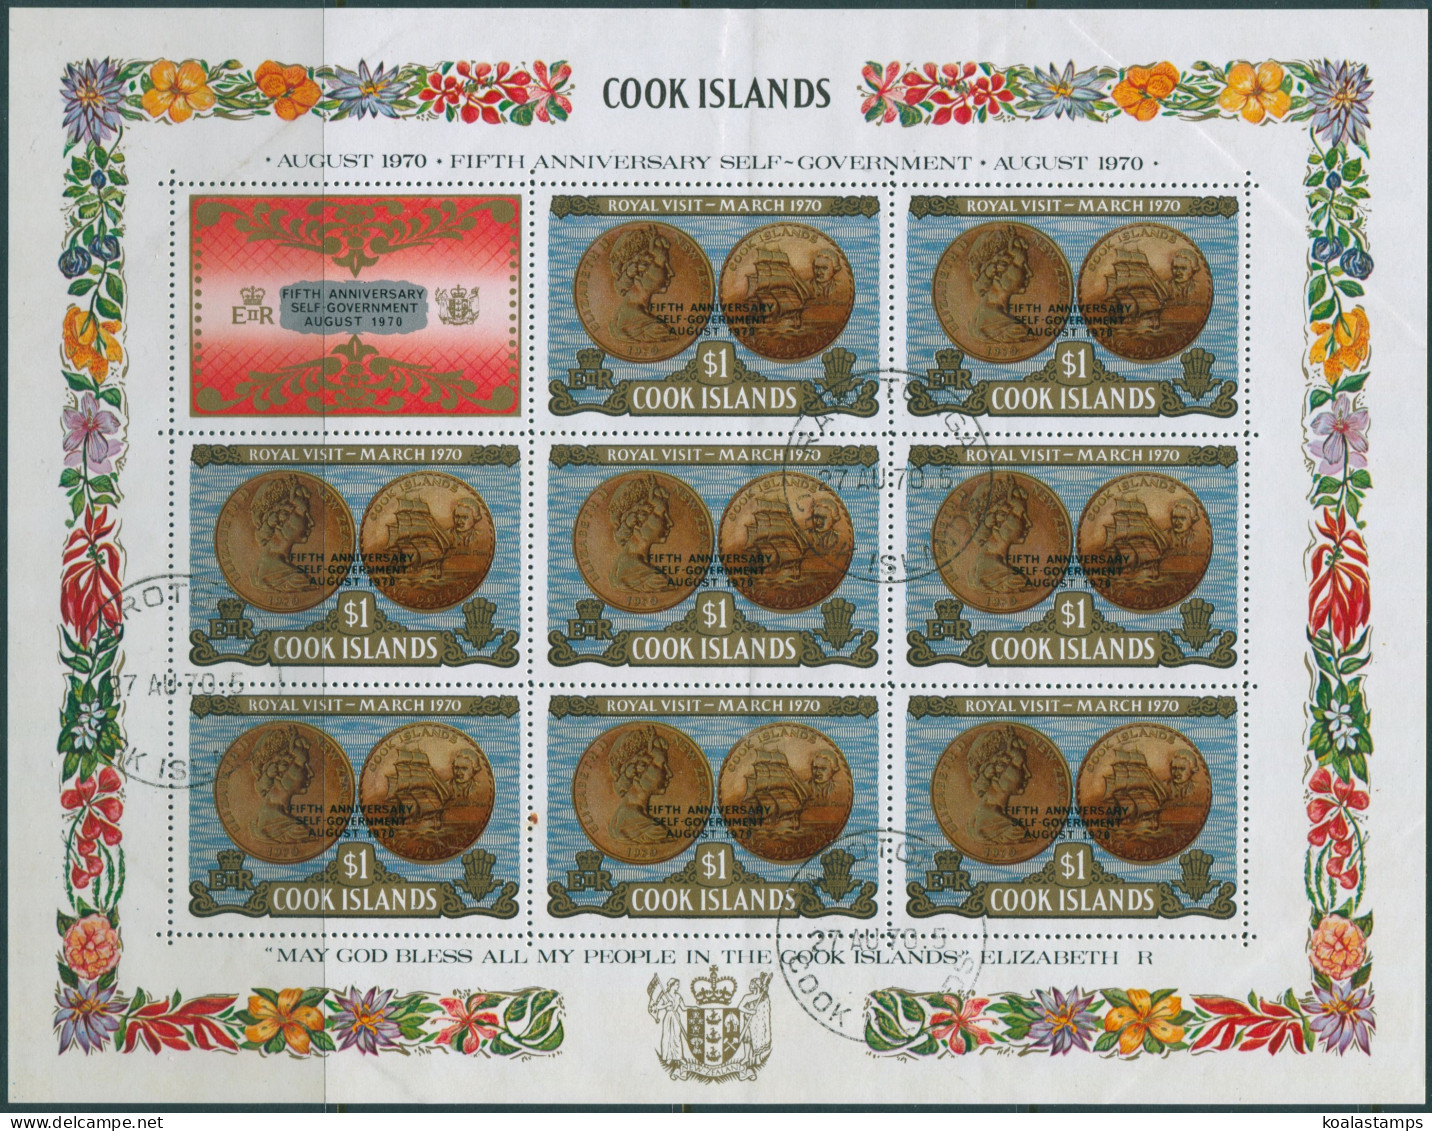 Cook Islands 1970 SG334 $1 Self-Government Ovpt Sheet FU - Islas Cook